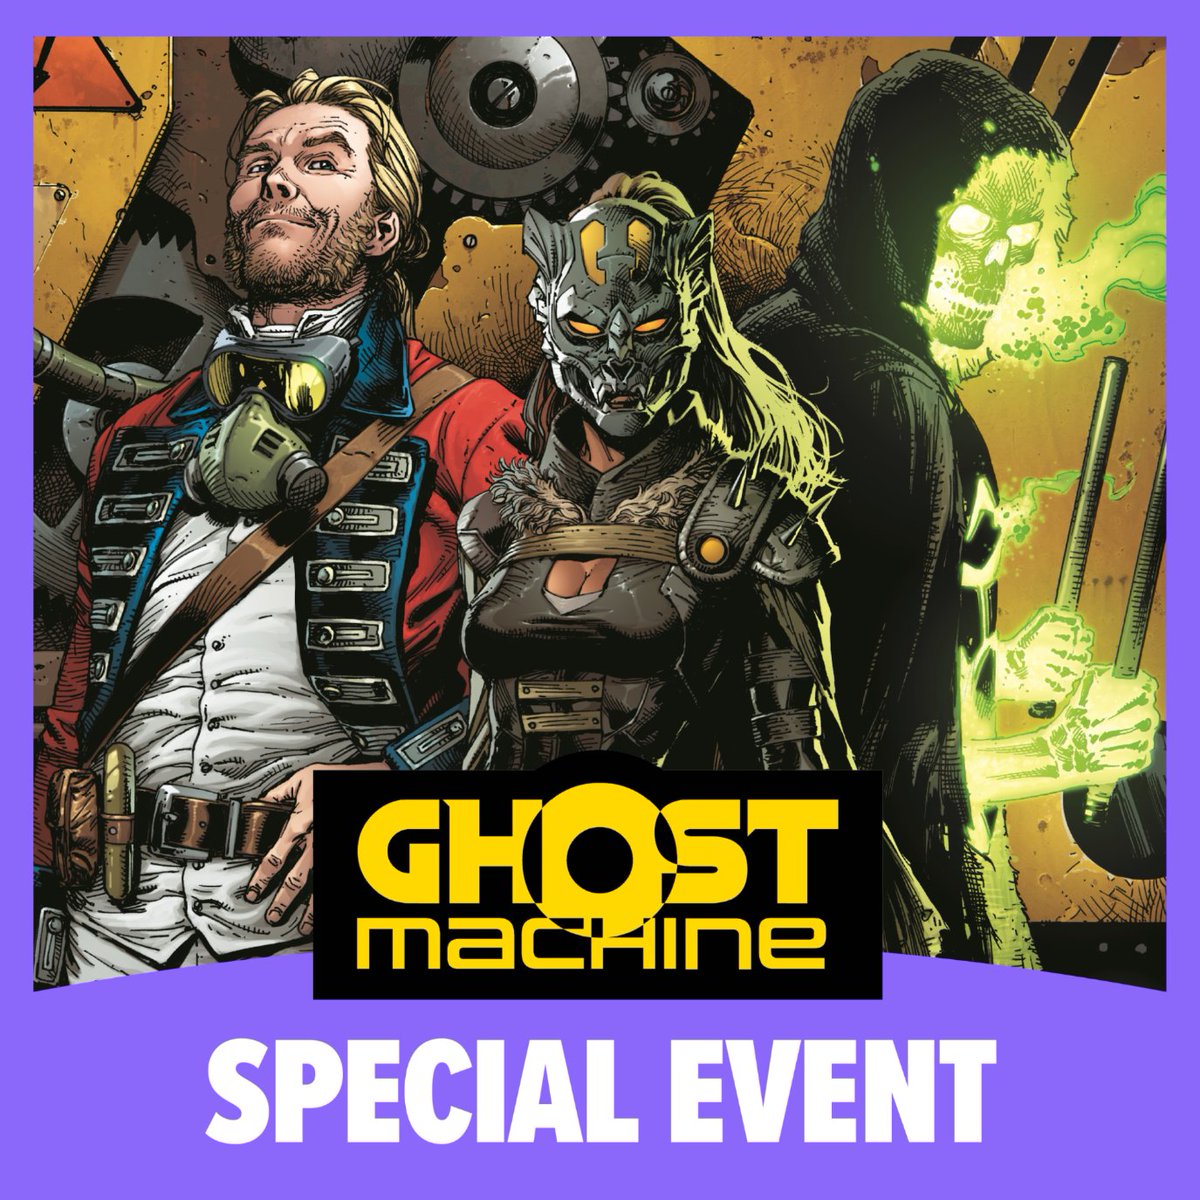 The creators behind Ghost Machine are coming to FAN EXPO with a special experience. Dine with industry giants like Geoff Johns and Jason Fabok at this intimate gathering and dive into the minds of comic legends. Book your spot now, seating is very limited. spr.ly/6017jGfxt